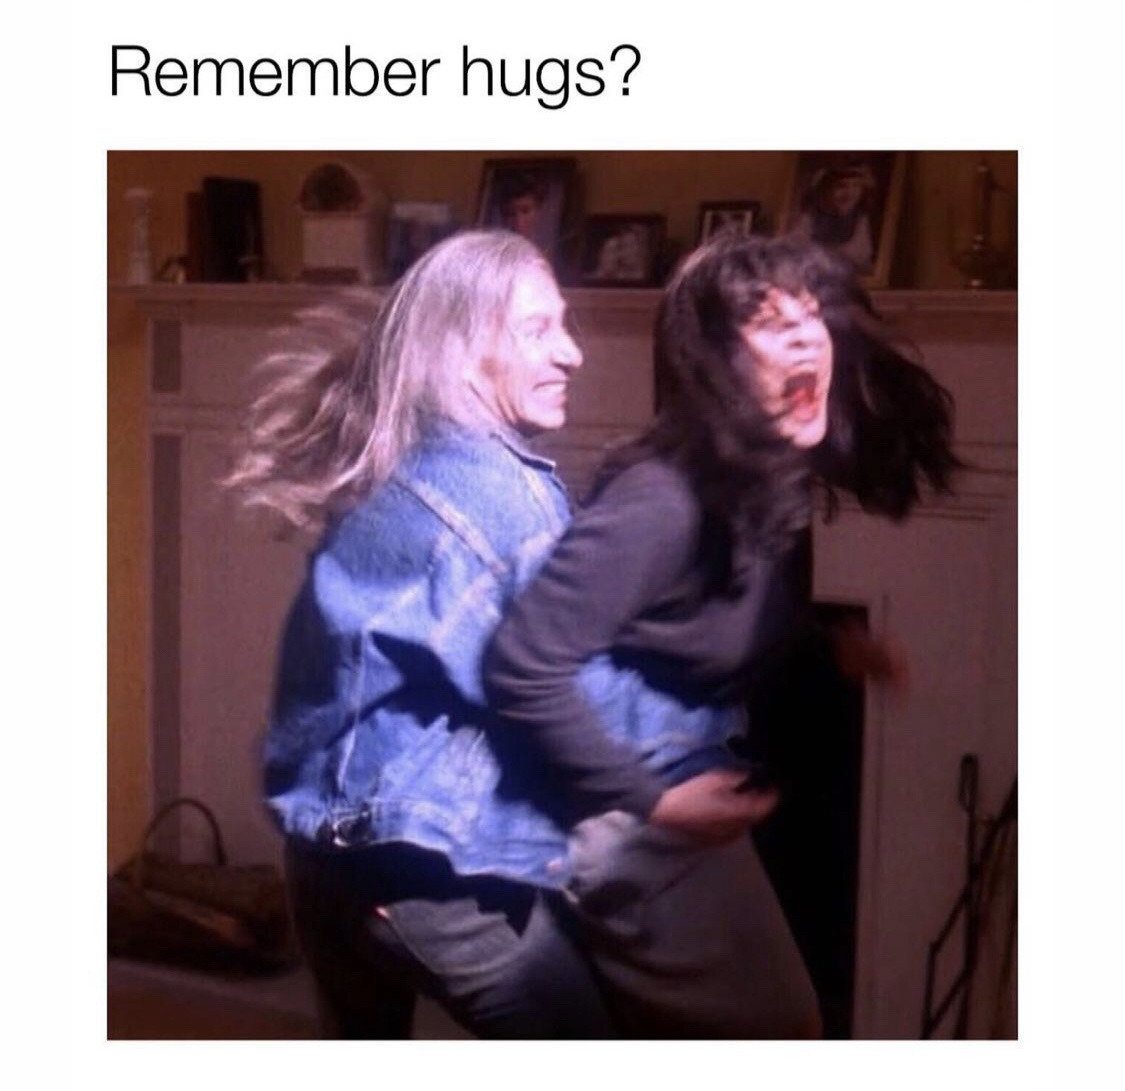 bob and maddy twin peaks - Remember hugs?